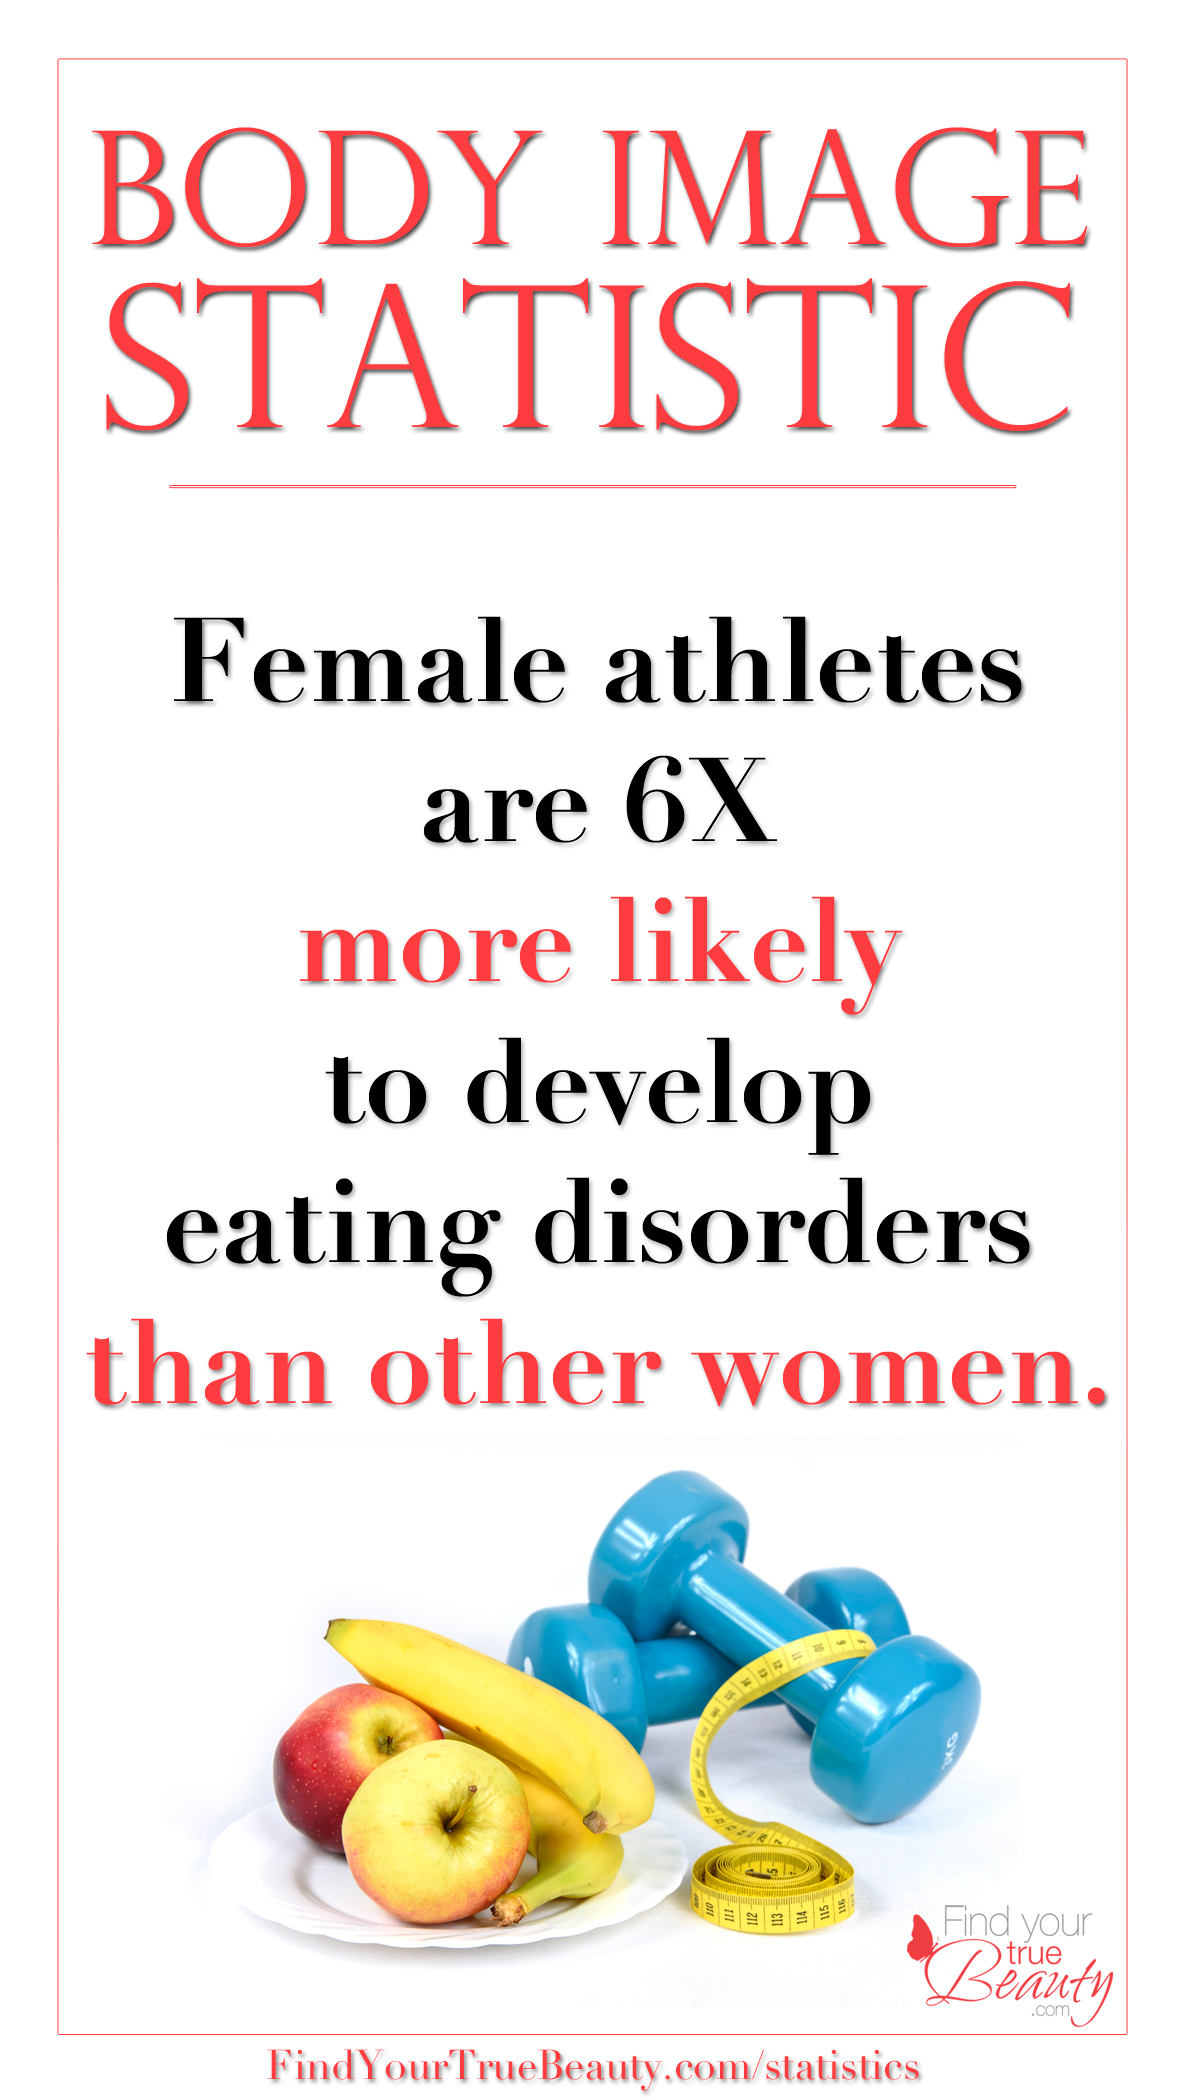 Body Image Statistic: Female athletes are 6x more likely to develop eating disorders than other women.